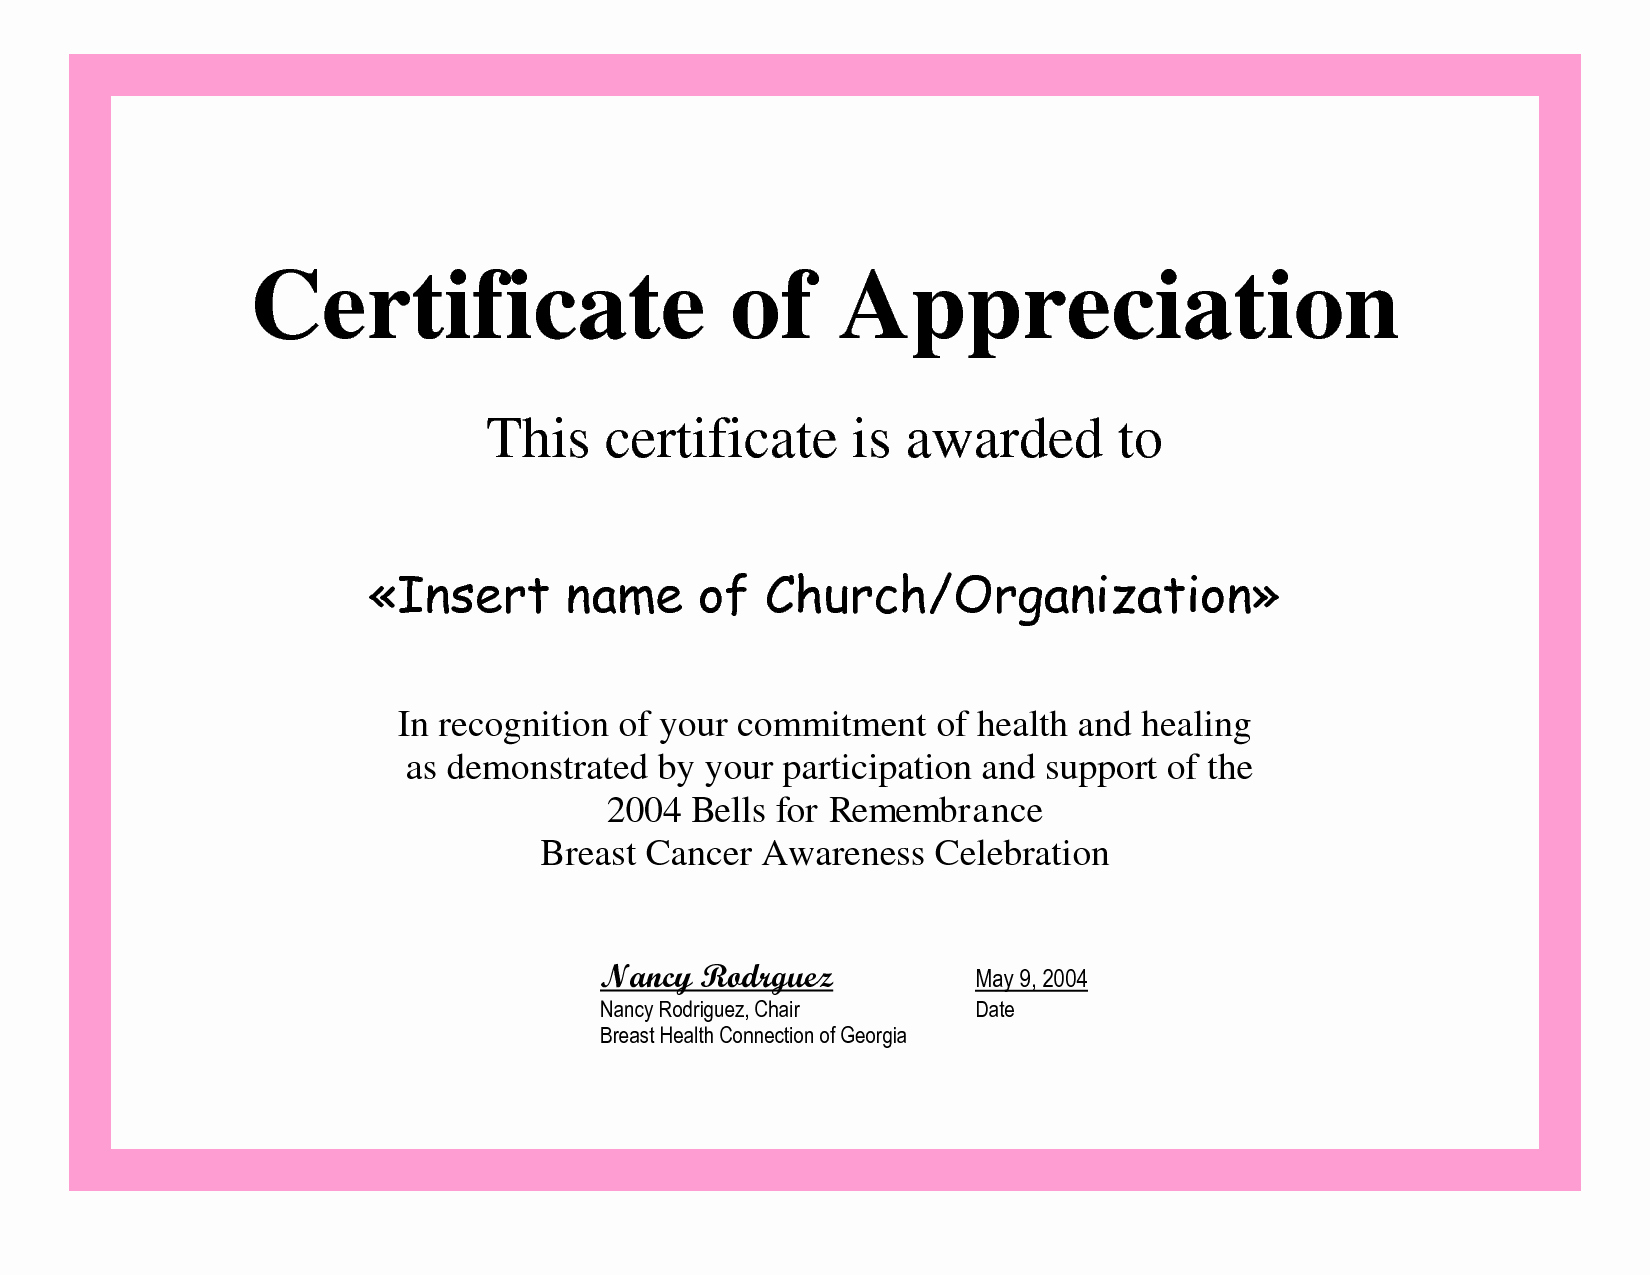 Sunday School Awards Recognition Unique Sample Certificate Ownership Letter Ferraricalifornia